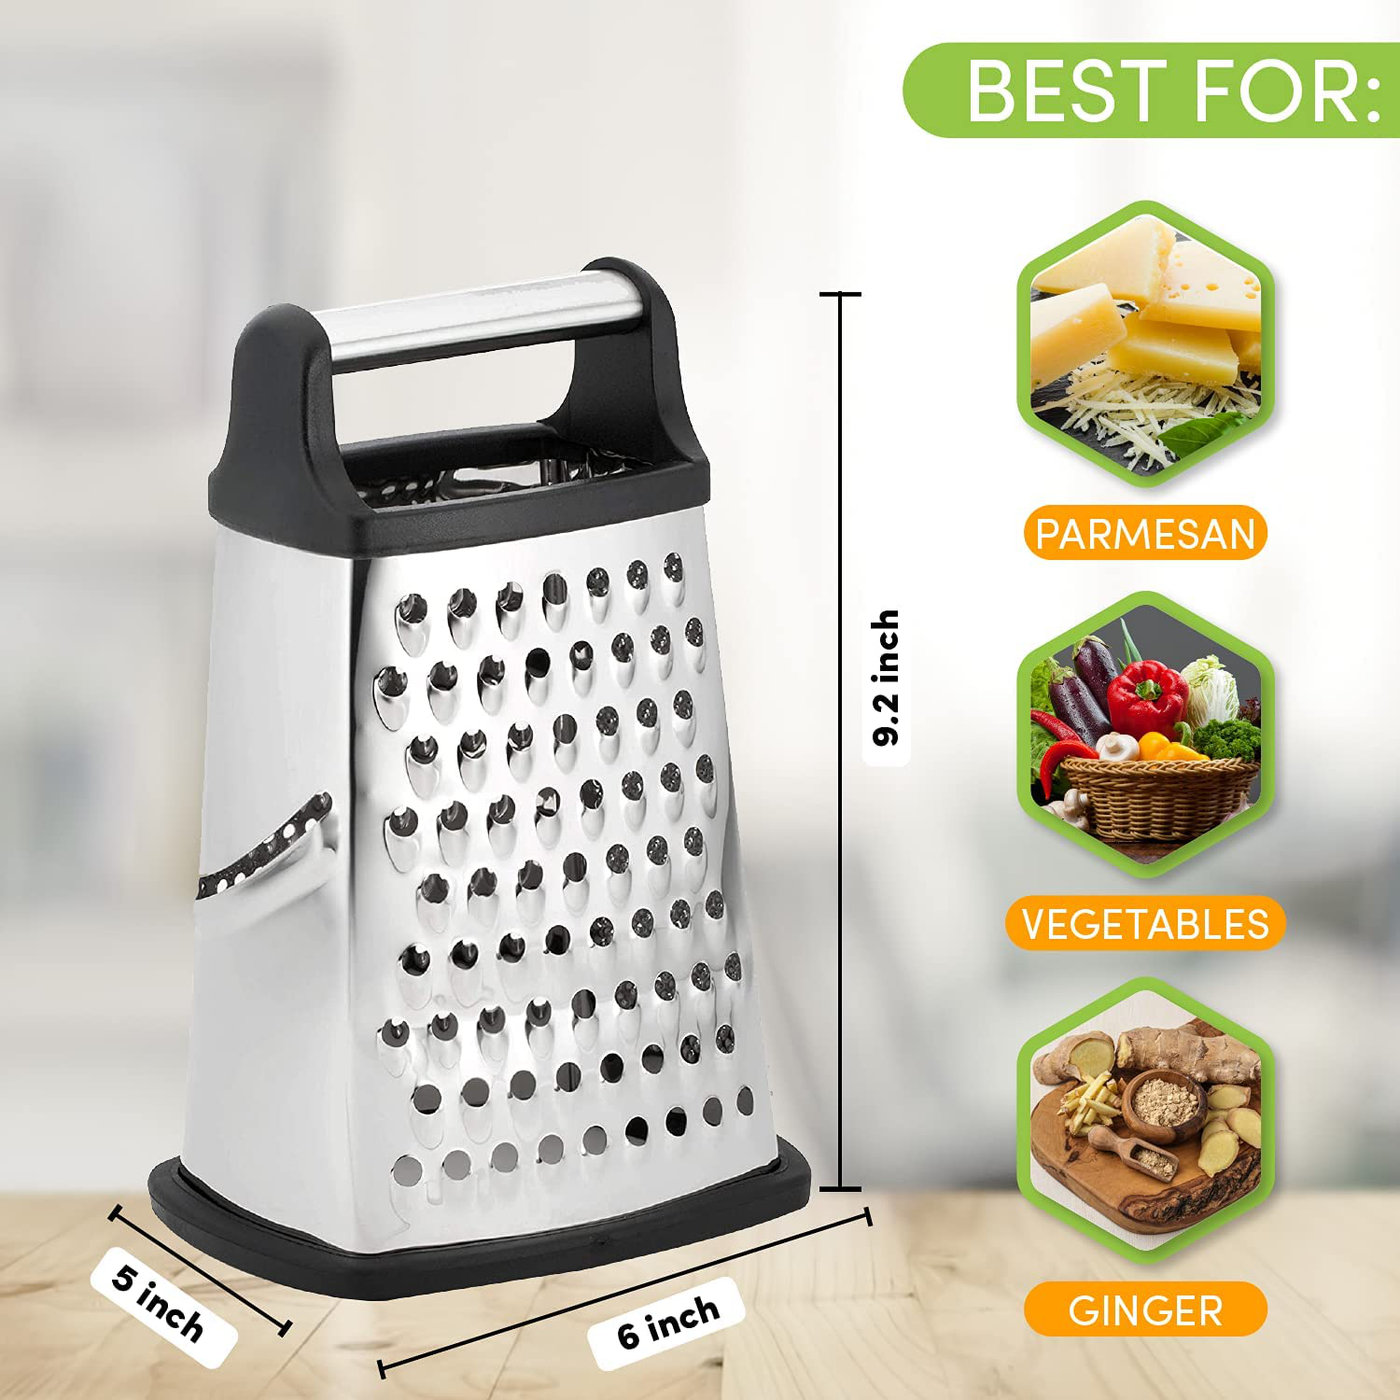 Spring Chef Professional Box Grater, Stainless Steel with 4 Sides, Best for Parmesan Cheese, Vegetables, Ginger, XL Size, Gray